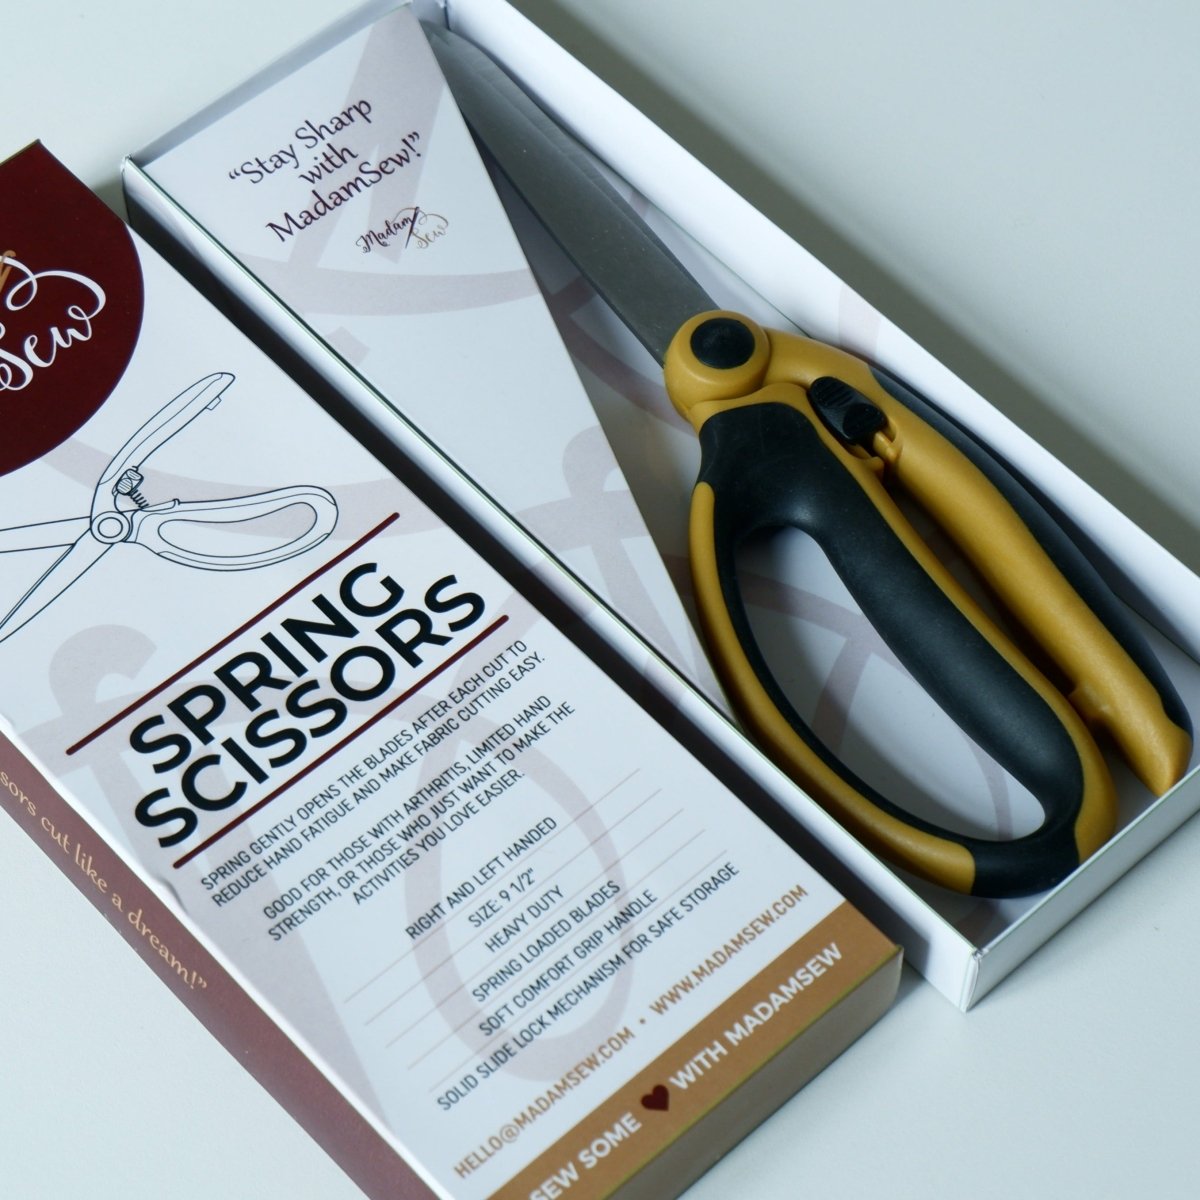 Spring Loaded Fabric Scissors for Sewing – MadamSew